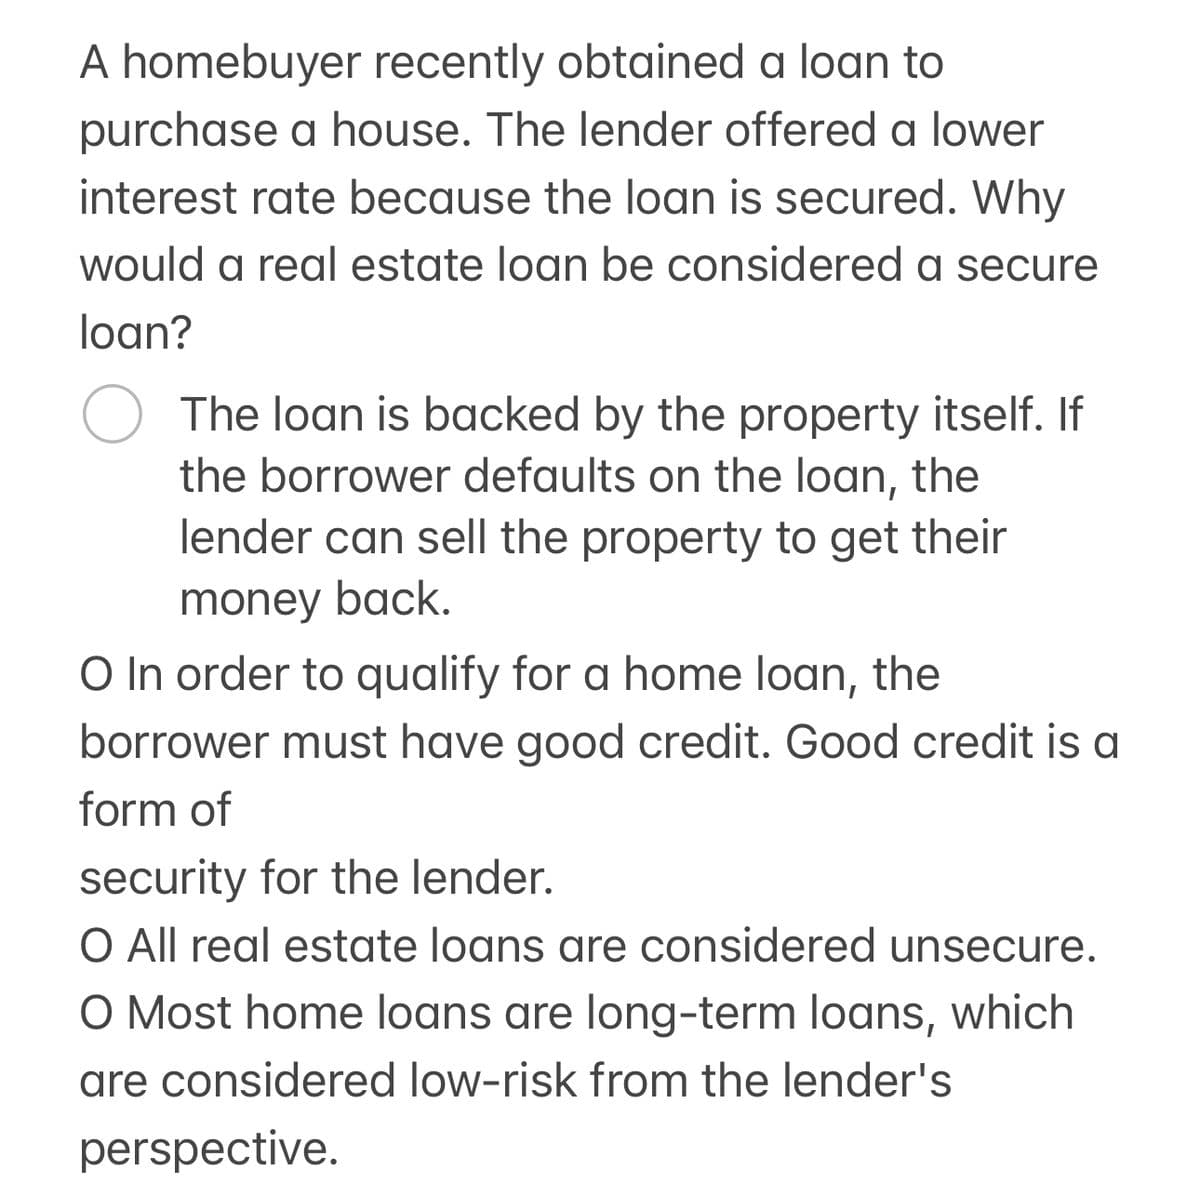 A homebuyer recently obtained a loan to
purchase a house. The lender offered a lower
interest rate because the loan is secured. Why
would a real estate loan be considered a secure
loan?
О The loan is backed by the property itself. If
the borrower defaults on the loan, the
lender can sell the property to get their
money back.
O In order to qualify for a home loan, the
borrower must have good credit. Good credit is a
form of
security for the lender.
O All real estate loans are considered unsecure.
O Most home loans are long-term loans, which
are considered low-risk from the lender's
perspective.